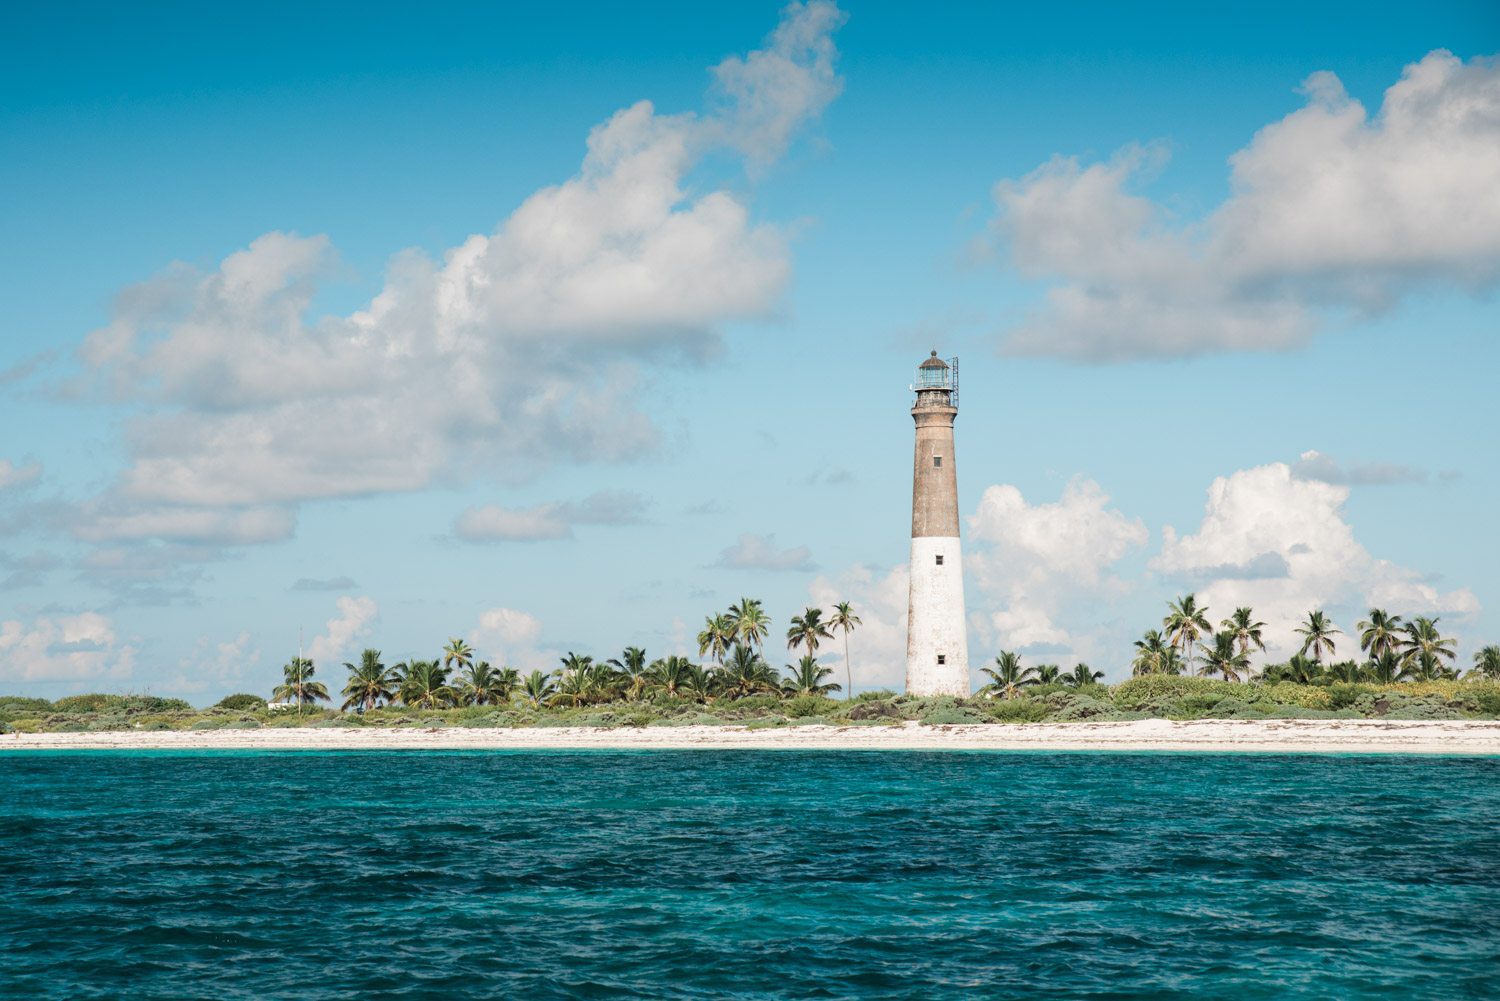 A dry tortugas lighthouse sits on a small island in the ocean, making it the perfect destination for an engagement session.